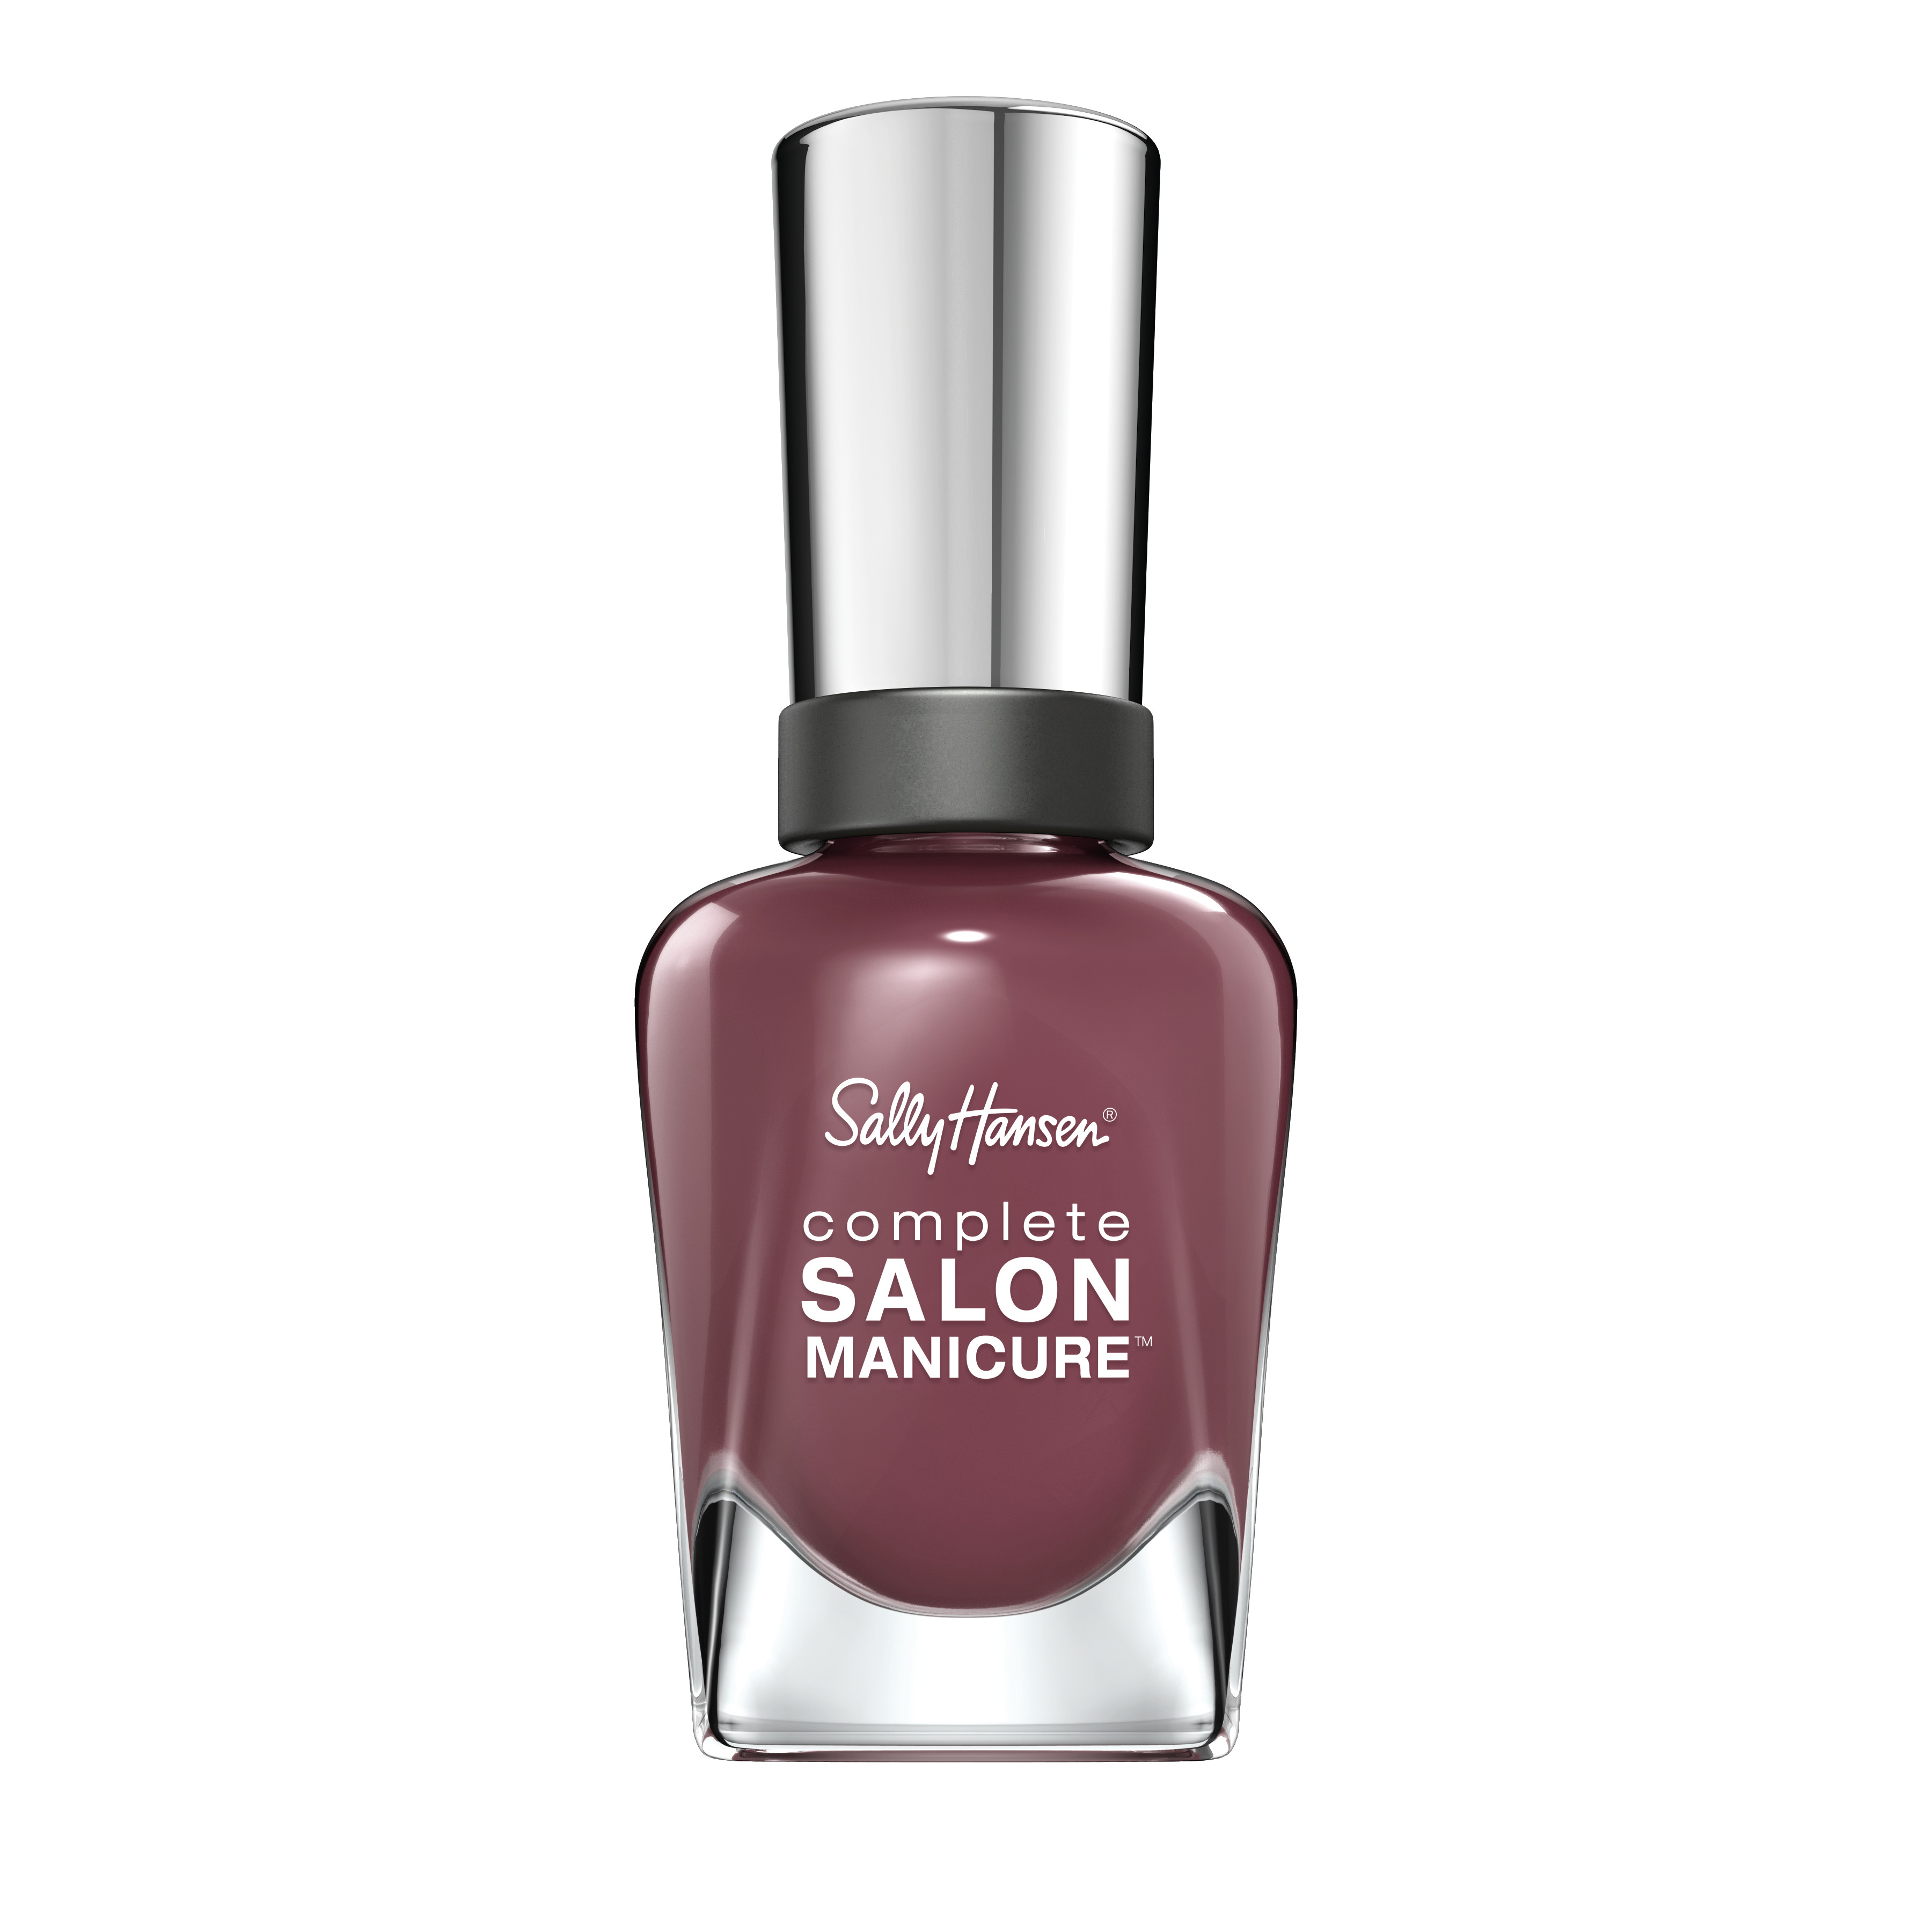 Sally Hansen Complete Salon Manicure Nail Color, Plums the Word - image 1 of 3